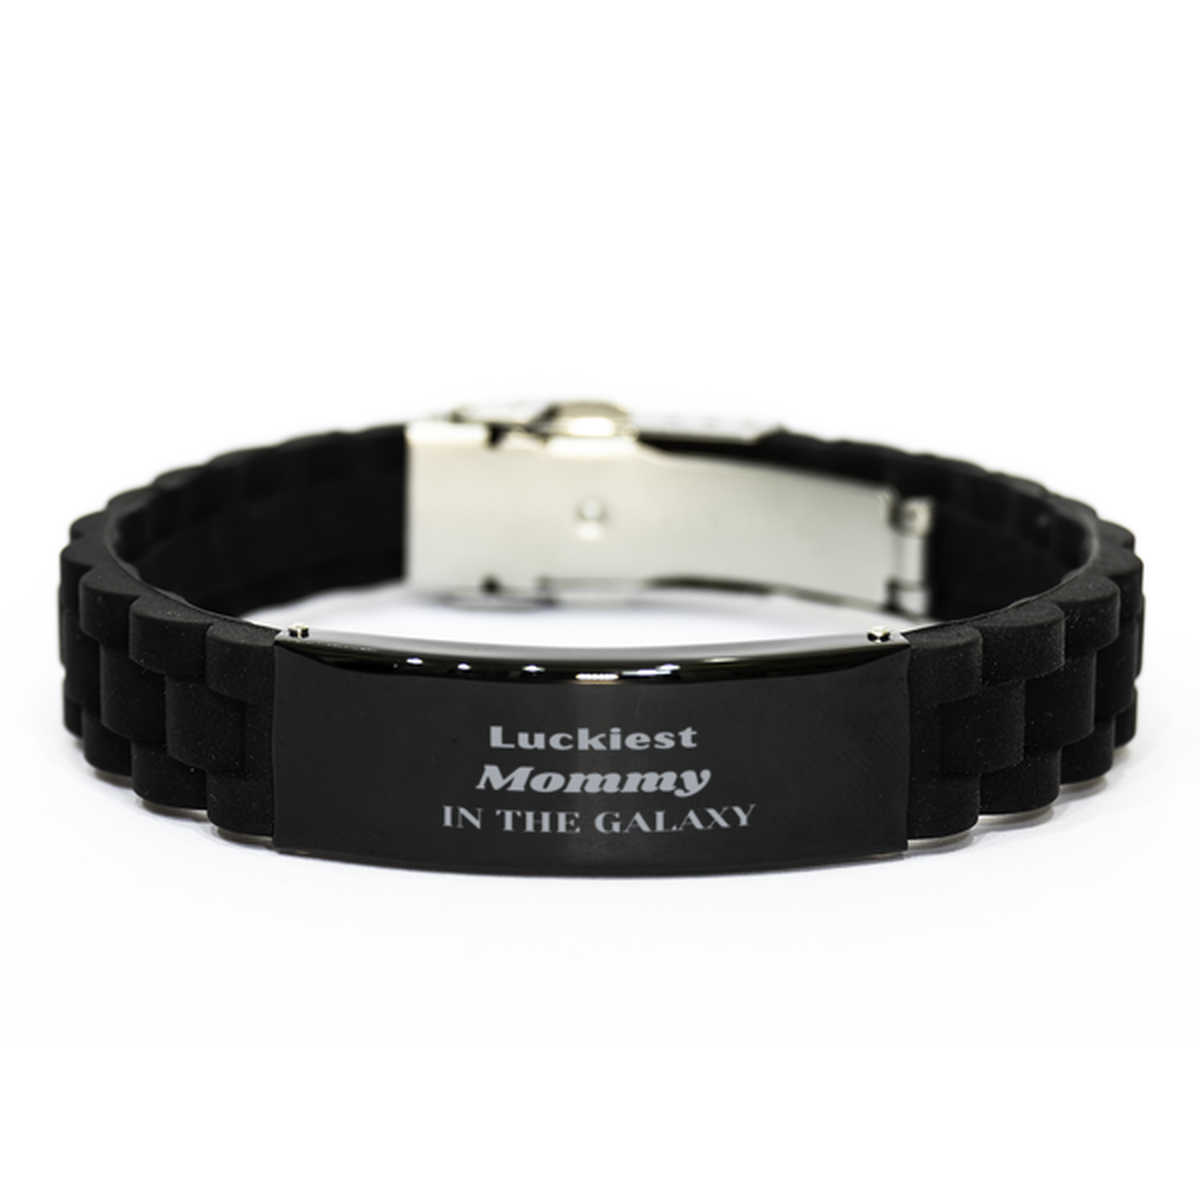 Luckiest Mommy in the Galaxy, To My Mommy Engraved Gifts, Christmas Mommy Black Glidelock Clasp Bracelet Gifts, X-mas Birthday Unique Gifts For Mommy Men Women